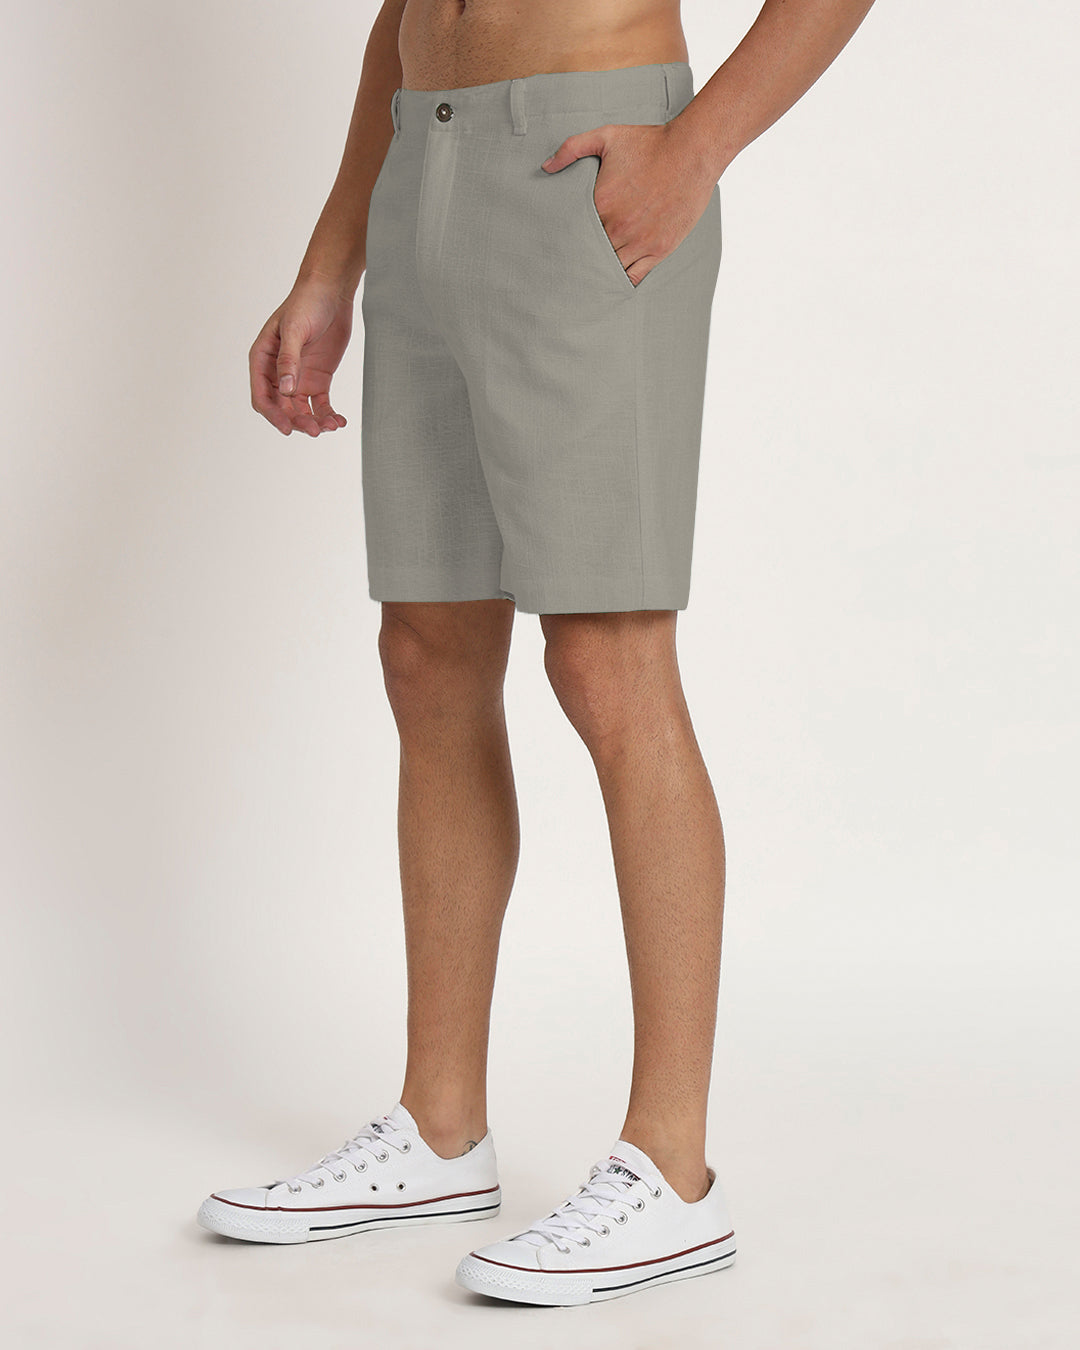 Combo : Ready For Anything Grey & Fondant Pink Men's Shorts